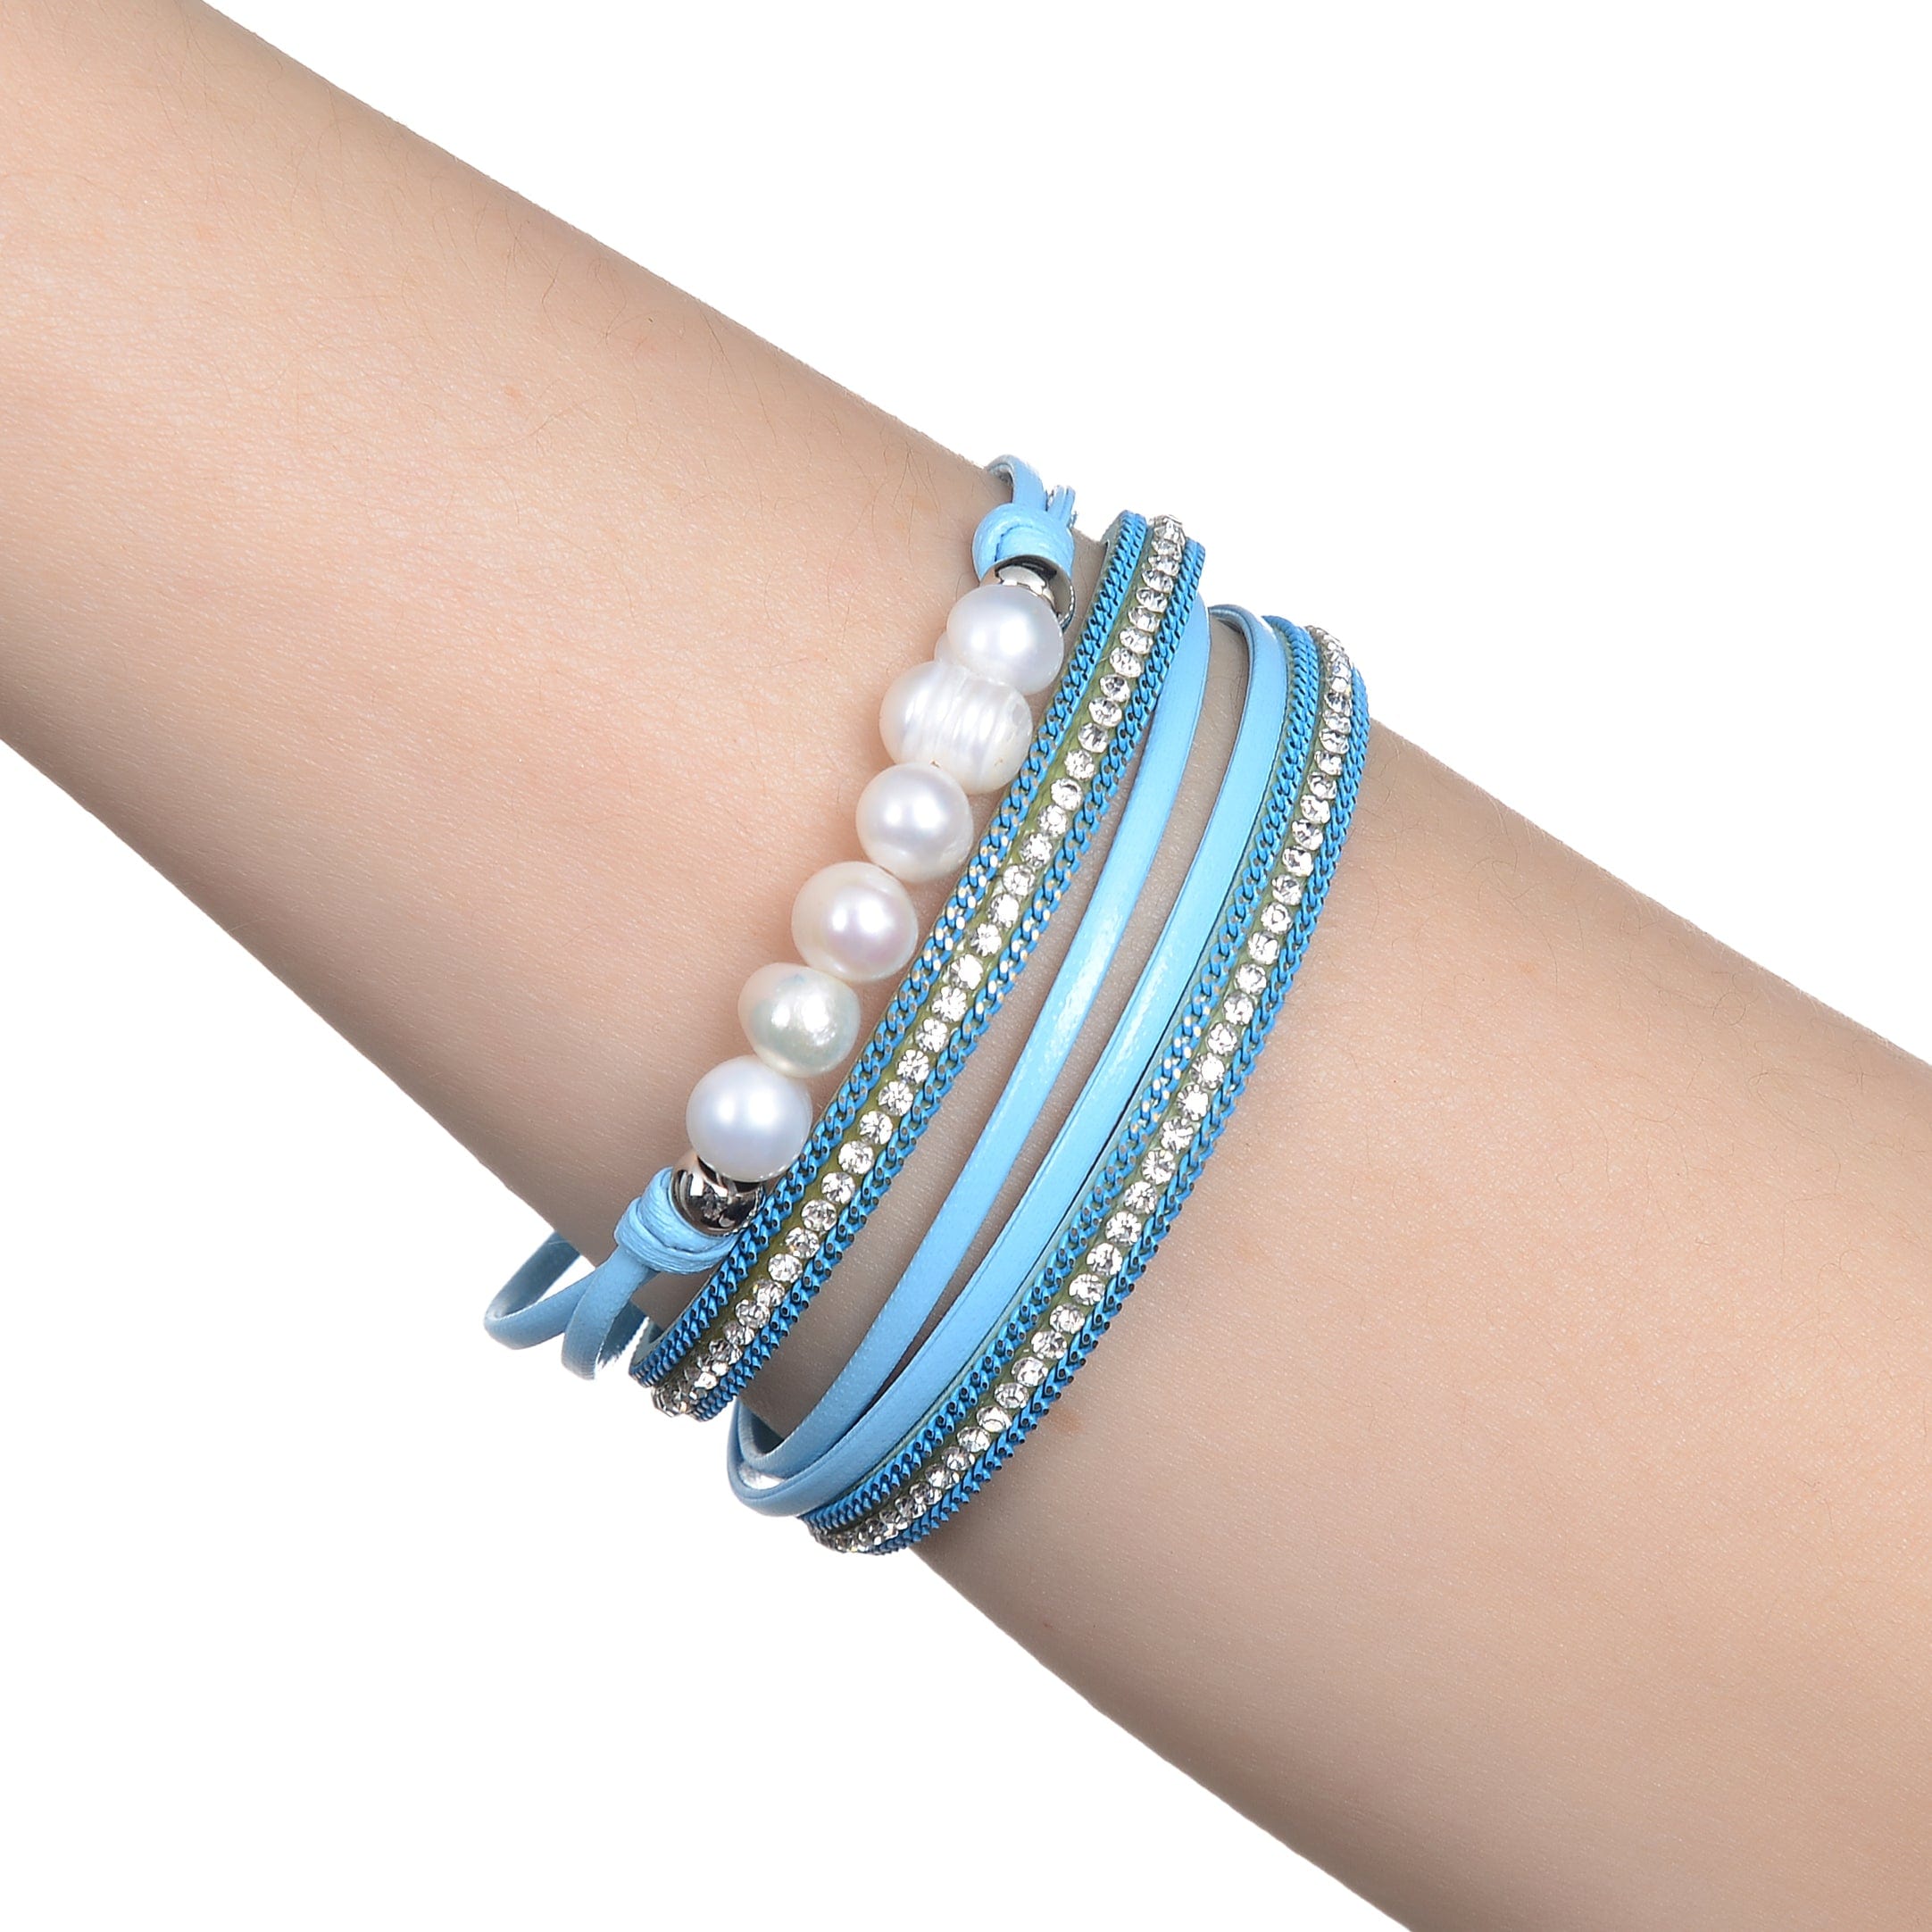 Kalifano Multiwrap Bracelets Multiple Strand Pearl and Diamonds Blue Bracelet with Magnetic Clasp BMW-20-BE